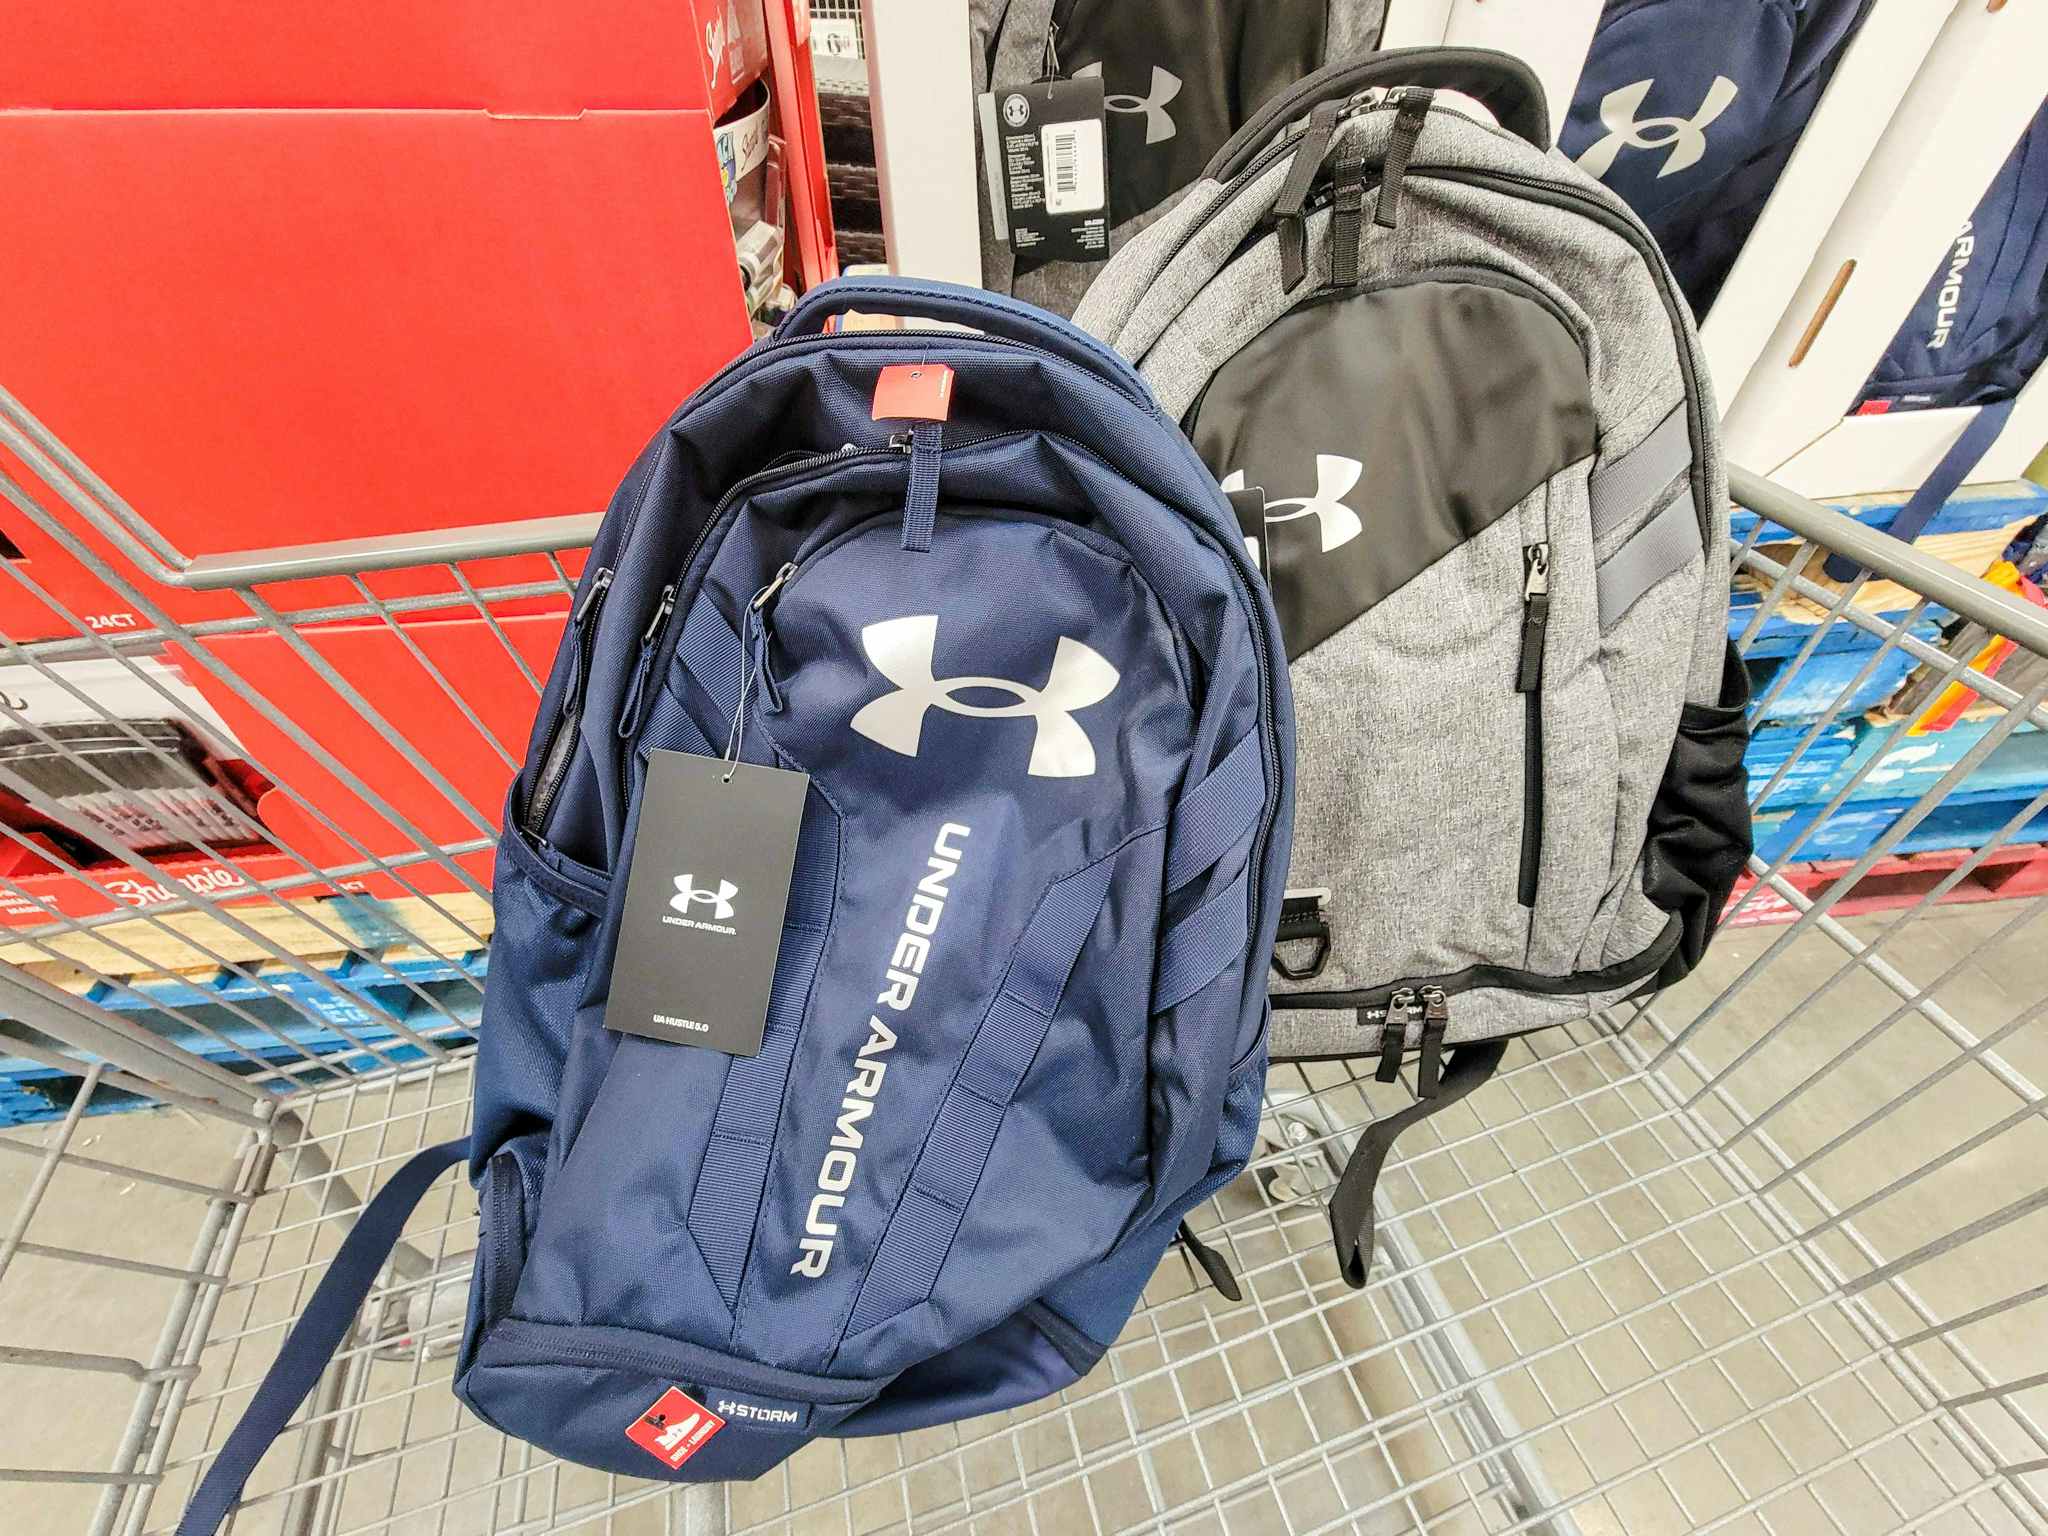 2 under armour backpacks in a cart, one blue and one grey